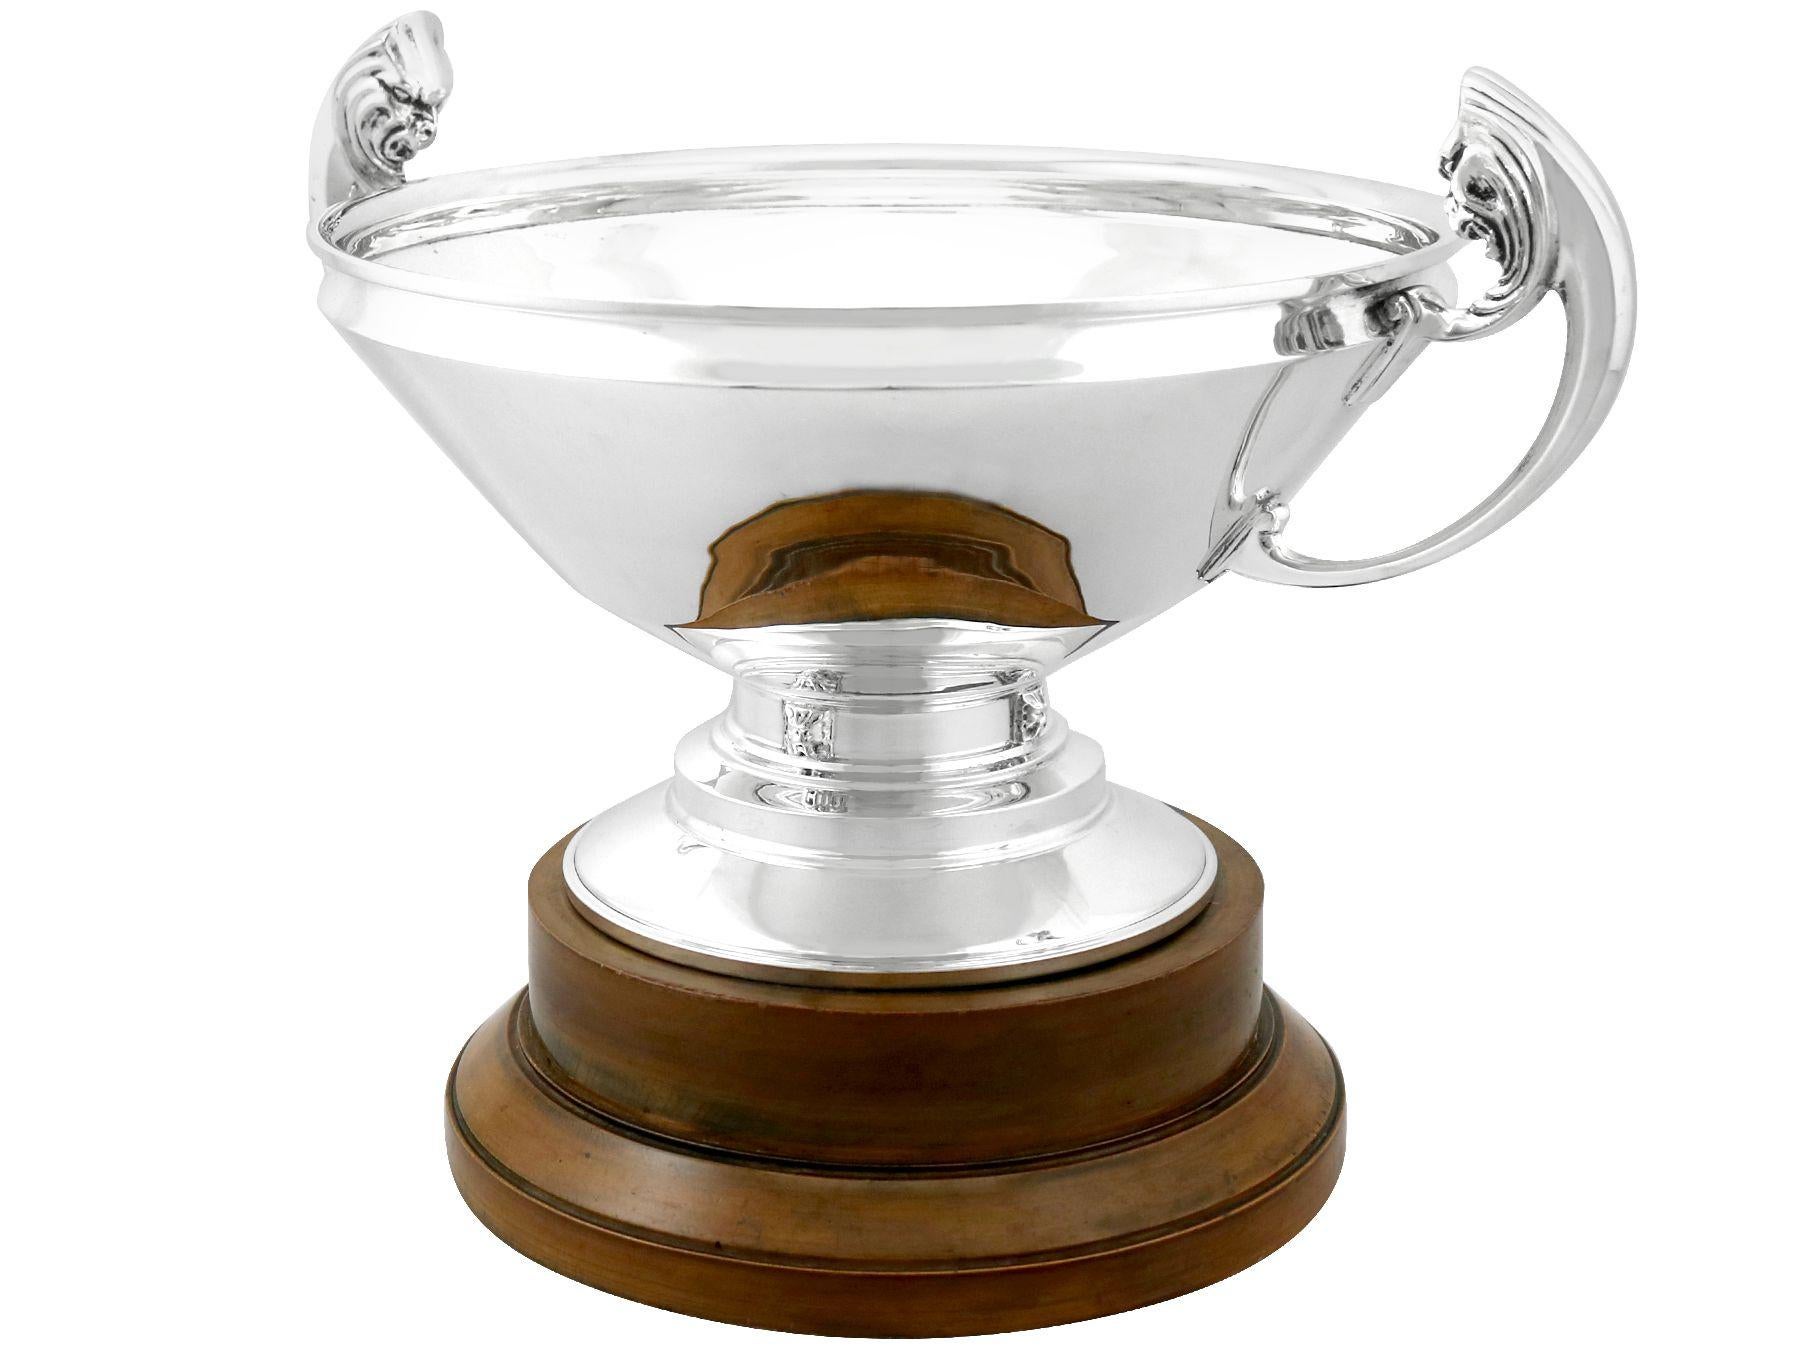 Antique Art Deco Sterling Silver Presentation Bowl (1993) In Excellent Condition For Sale In Jesmond, Newcastle Upon Tyne